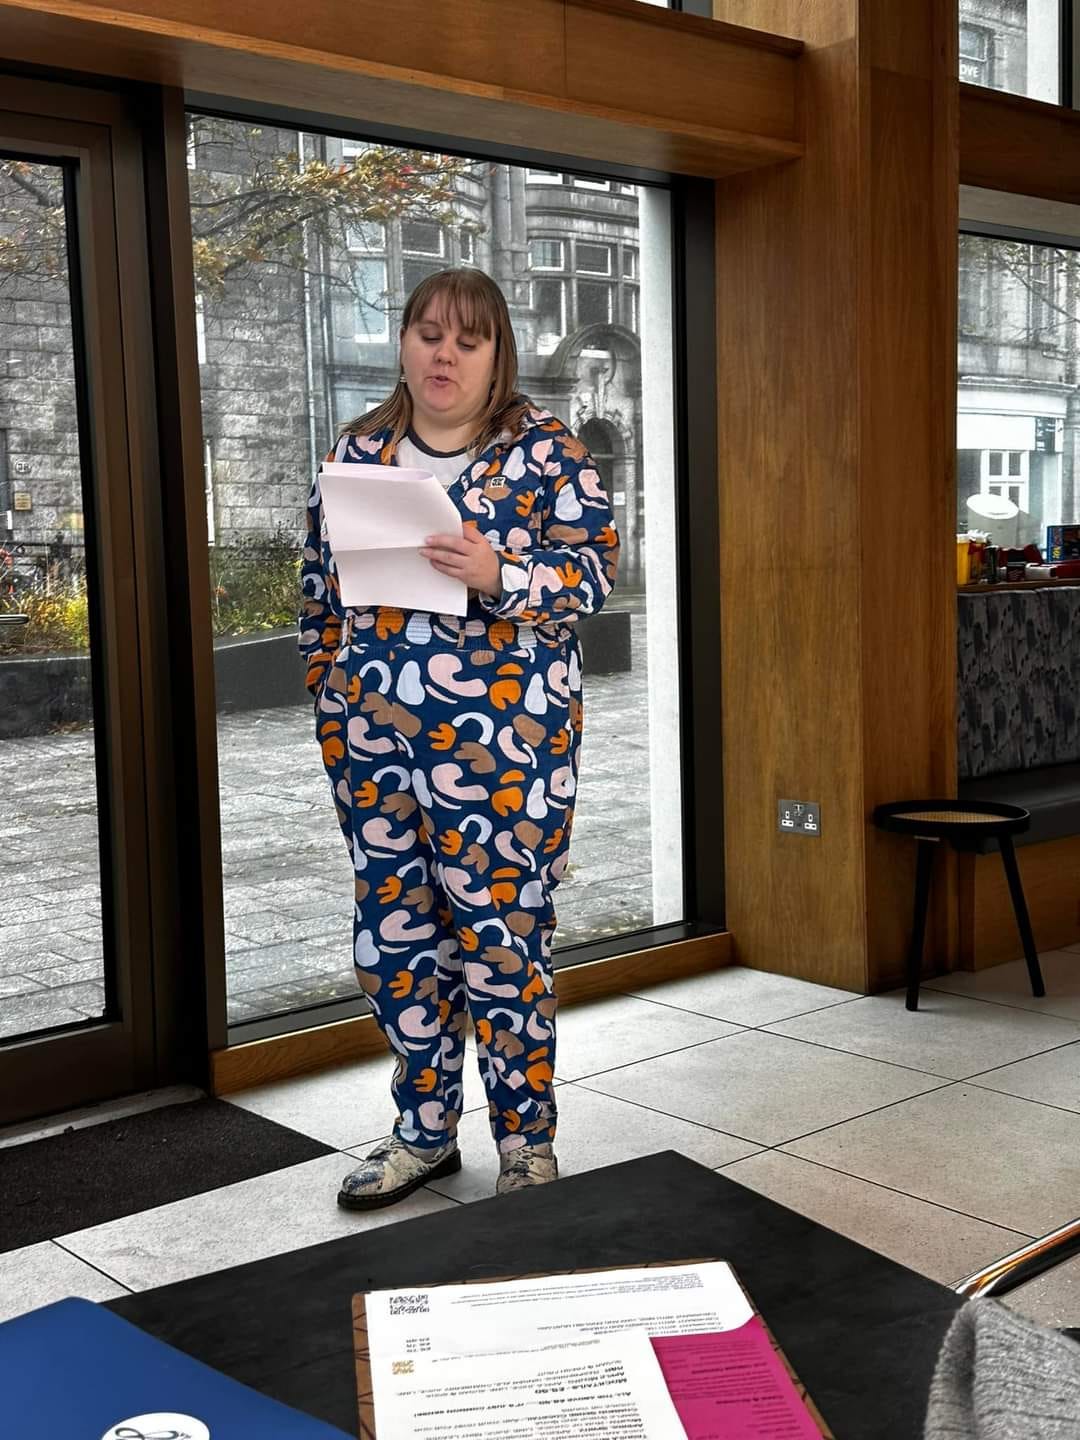 Hannah, 35, is a 5'5.5" white female with blonde hair. She is wearing a blue and autumnally patterned corduroy Lucy and Yak jumpsuit, a Tom Petty t-shirt and a pair of Doc Martens boots with a Great Wave of Kanagawa design on them. She is standing inside a cafe on a dreich Aberdeen day reading poems from a sheet. 